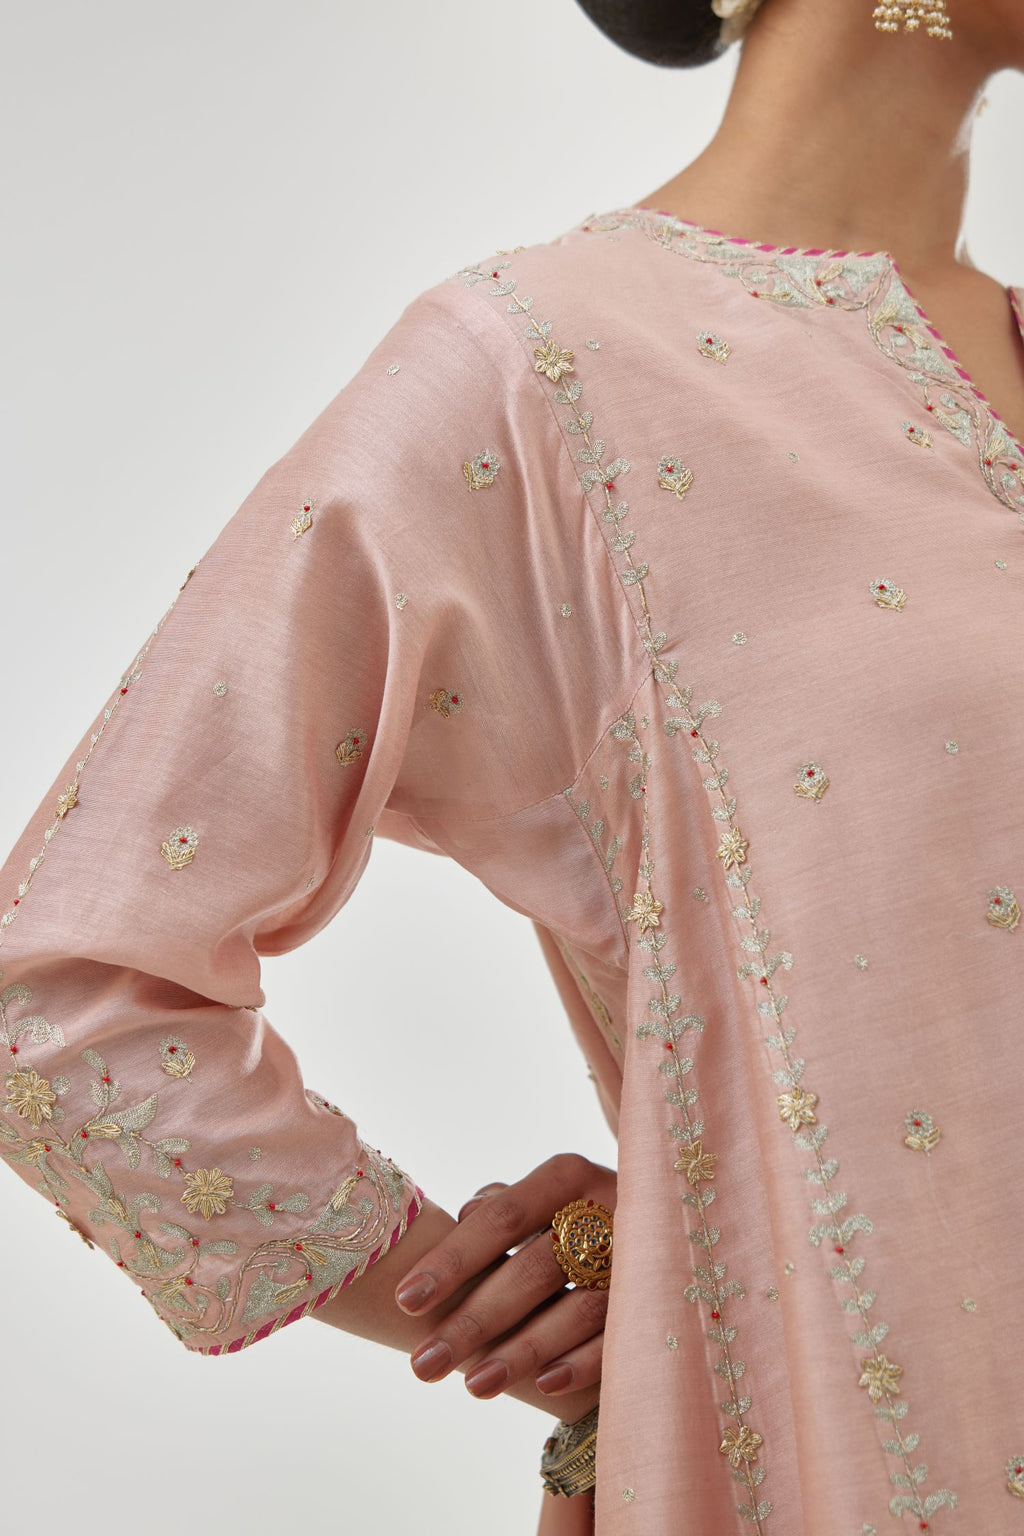 Pink silk chanderi short kalidar kurta set with all-over delicate zari bootis, detailed with dori embroidery and contrast bead work.